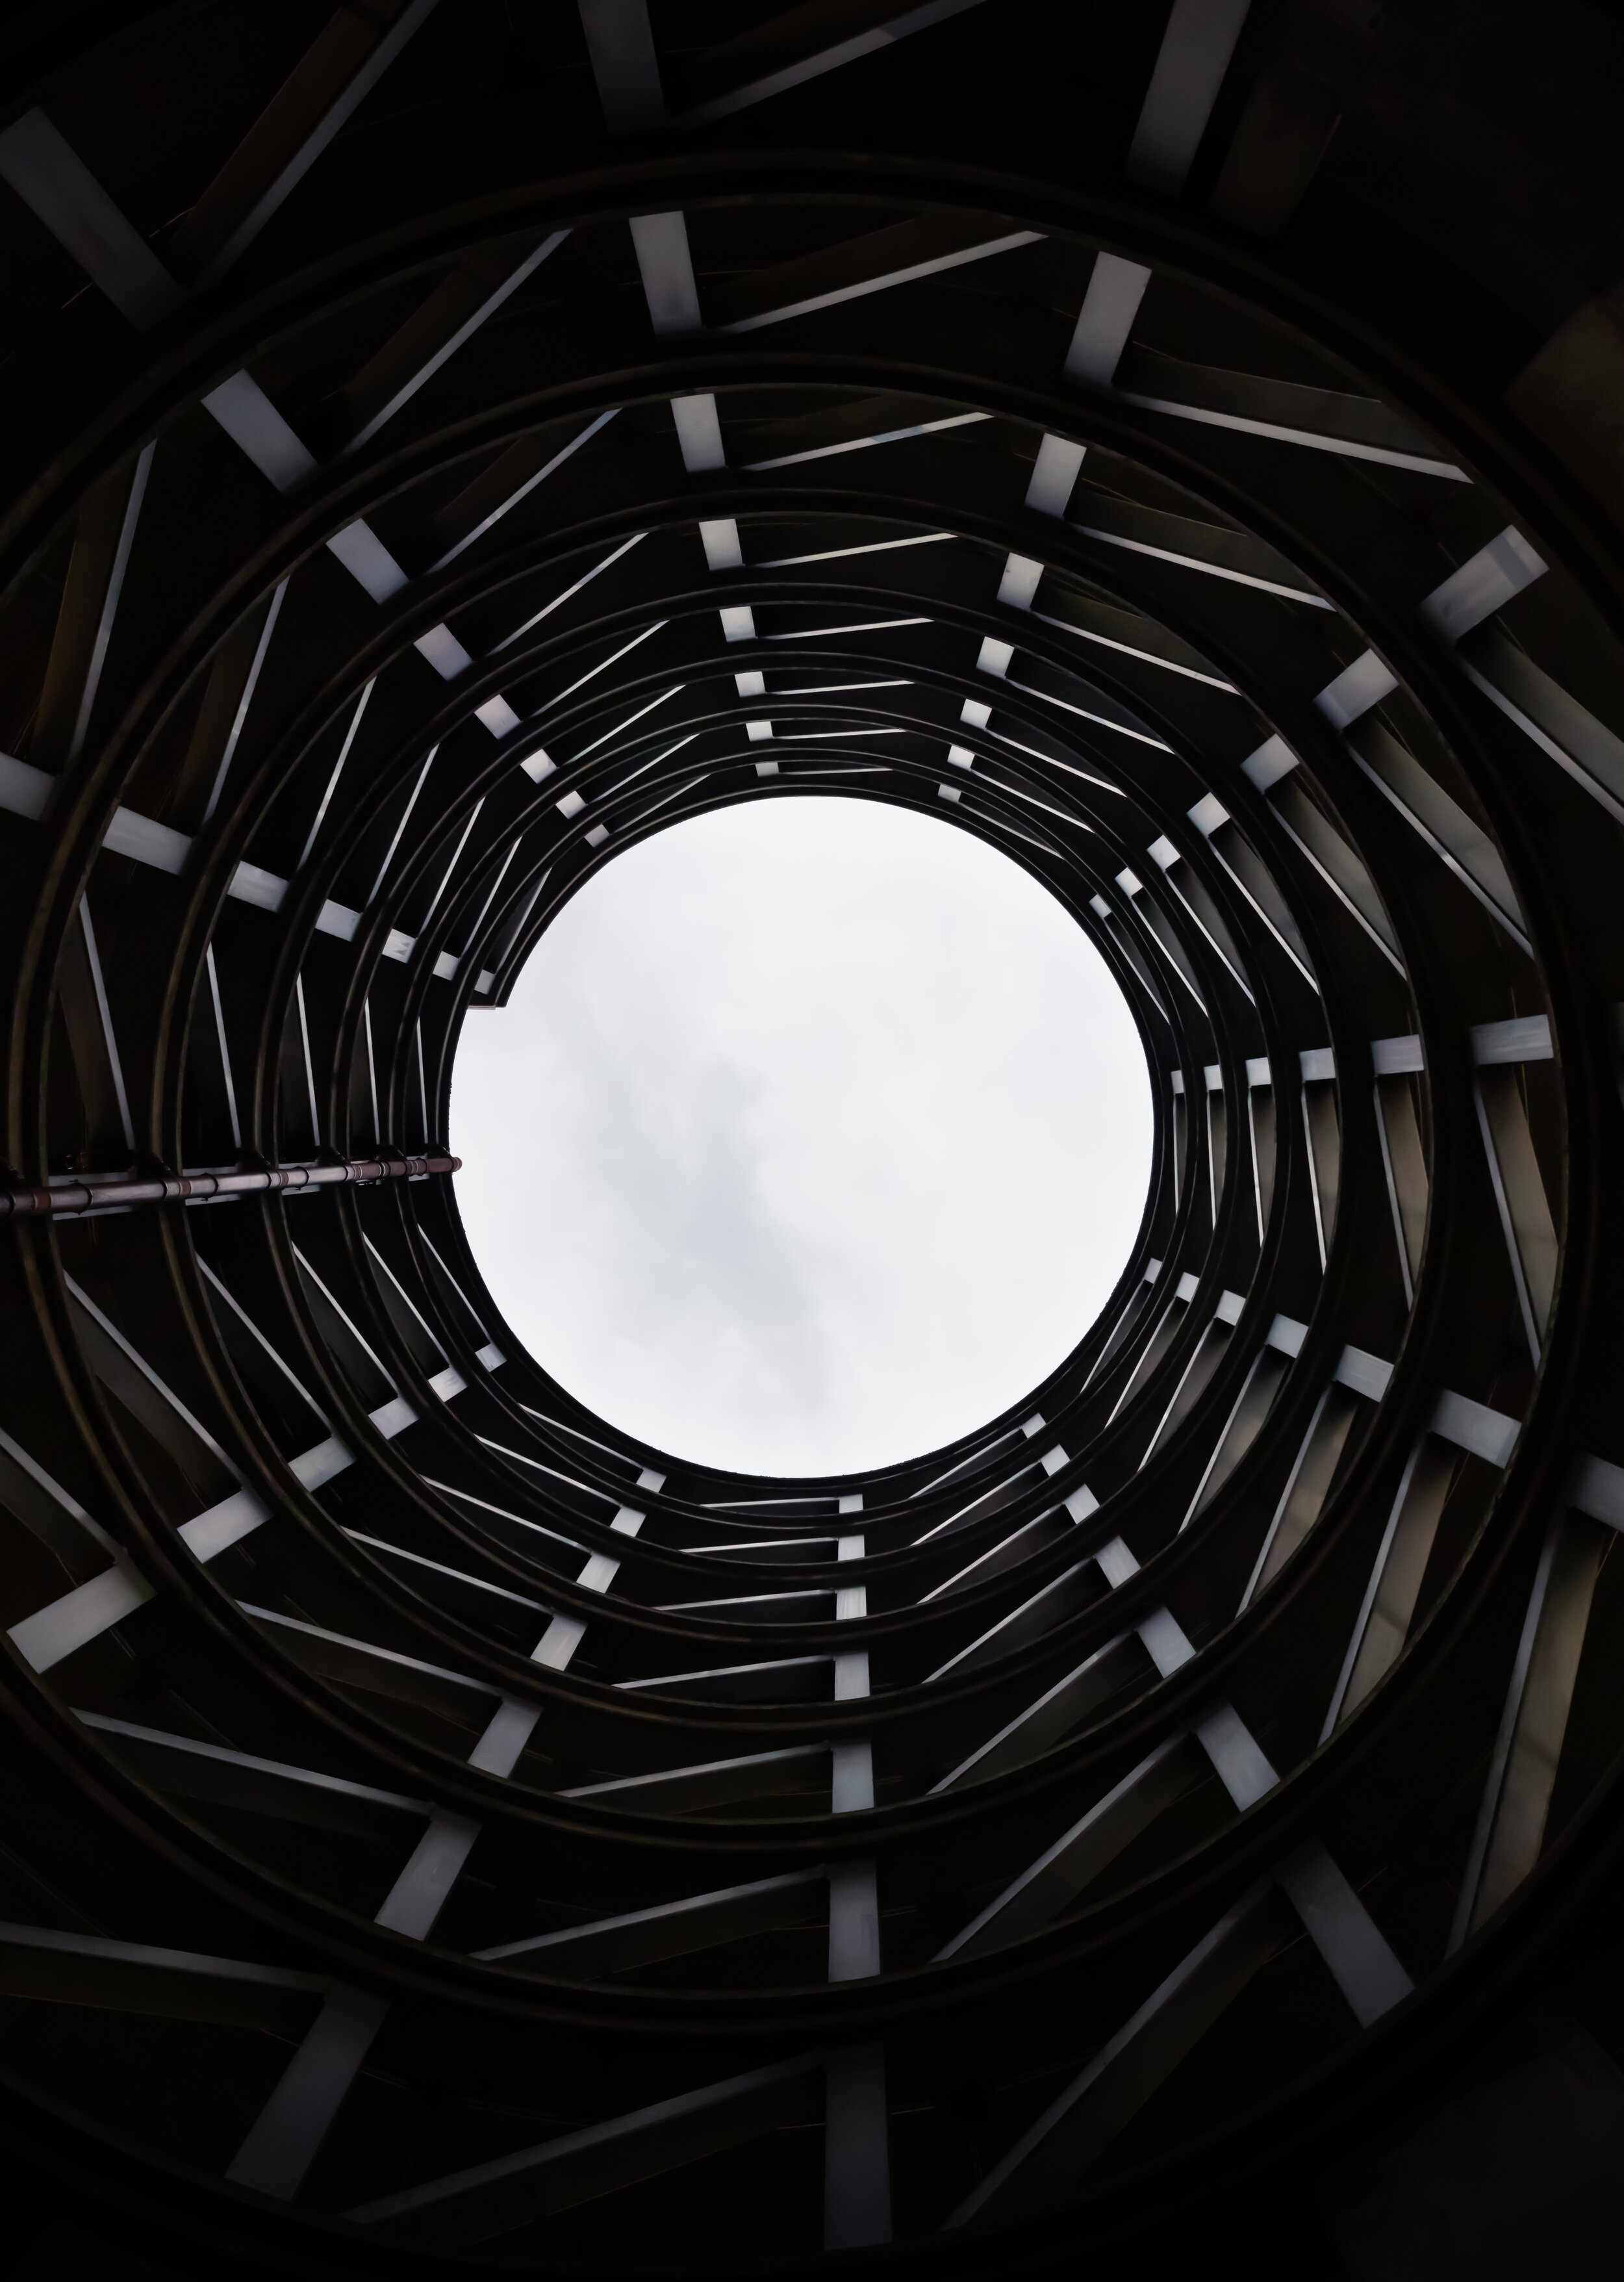 view looking up through a cylindrical building